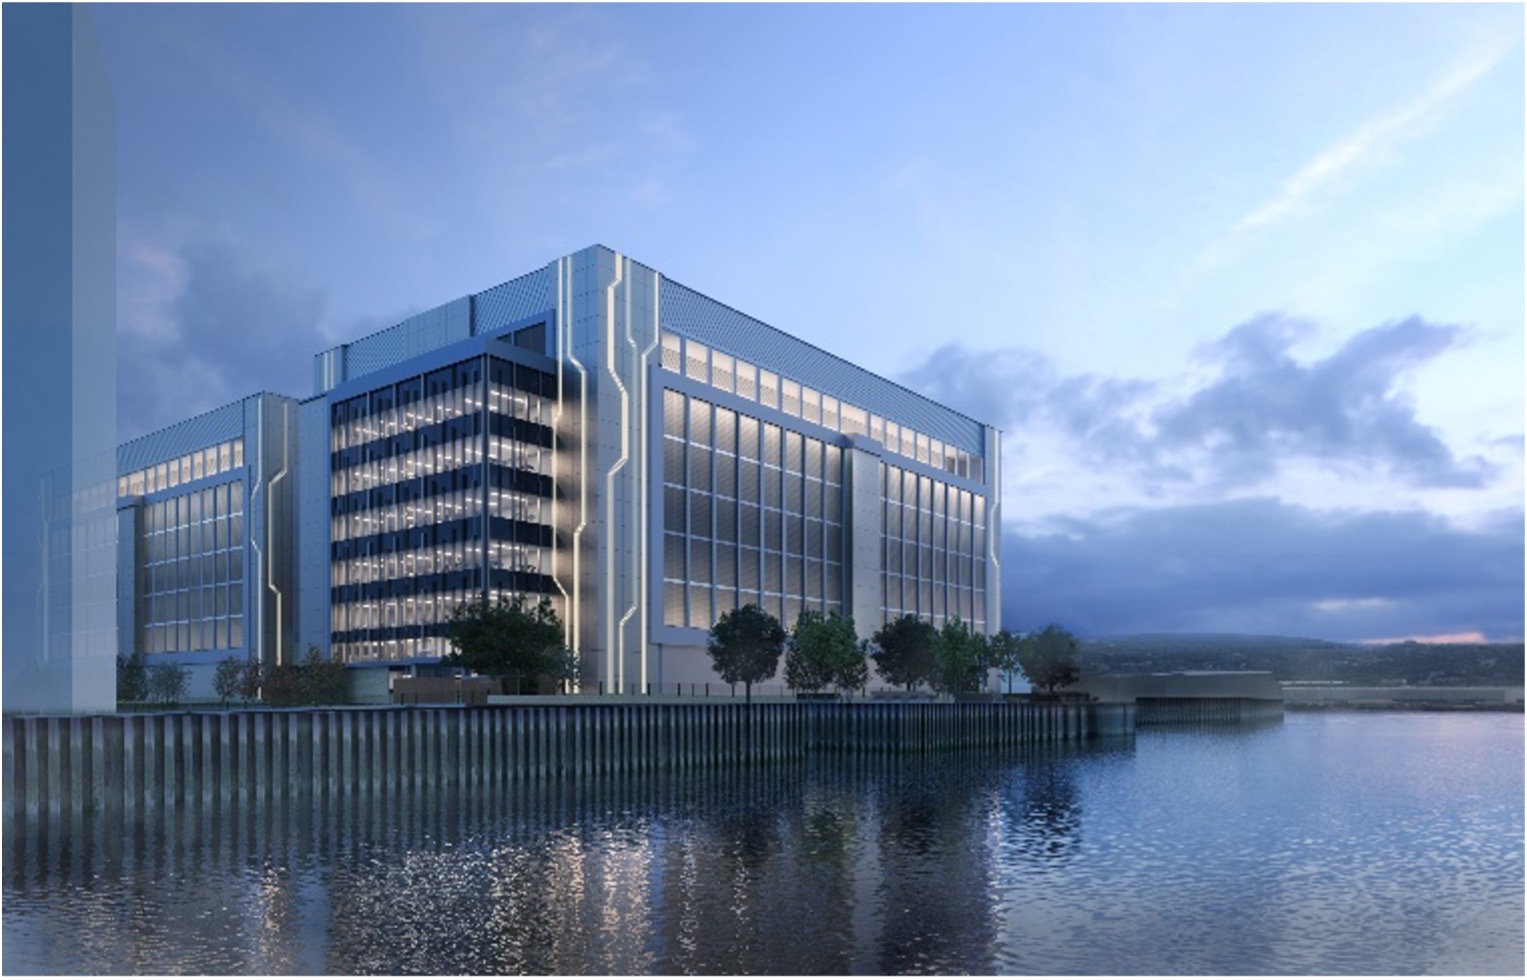 Proposed designs for the new Royal Docks Data Campus